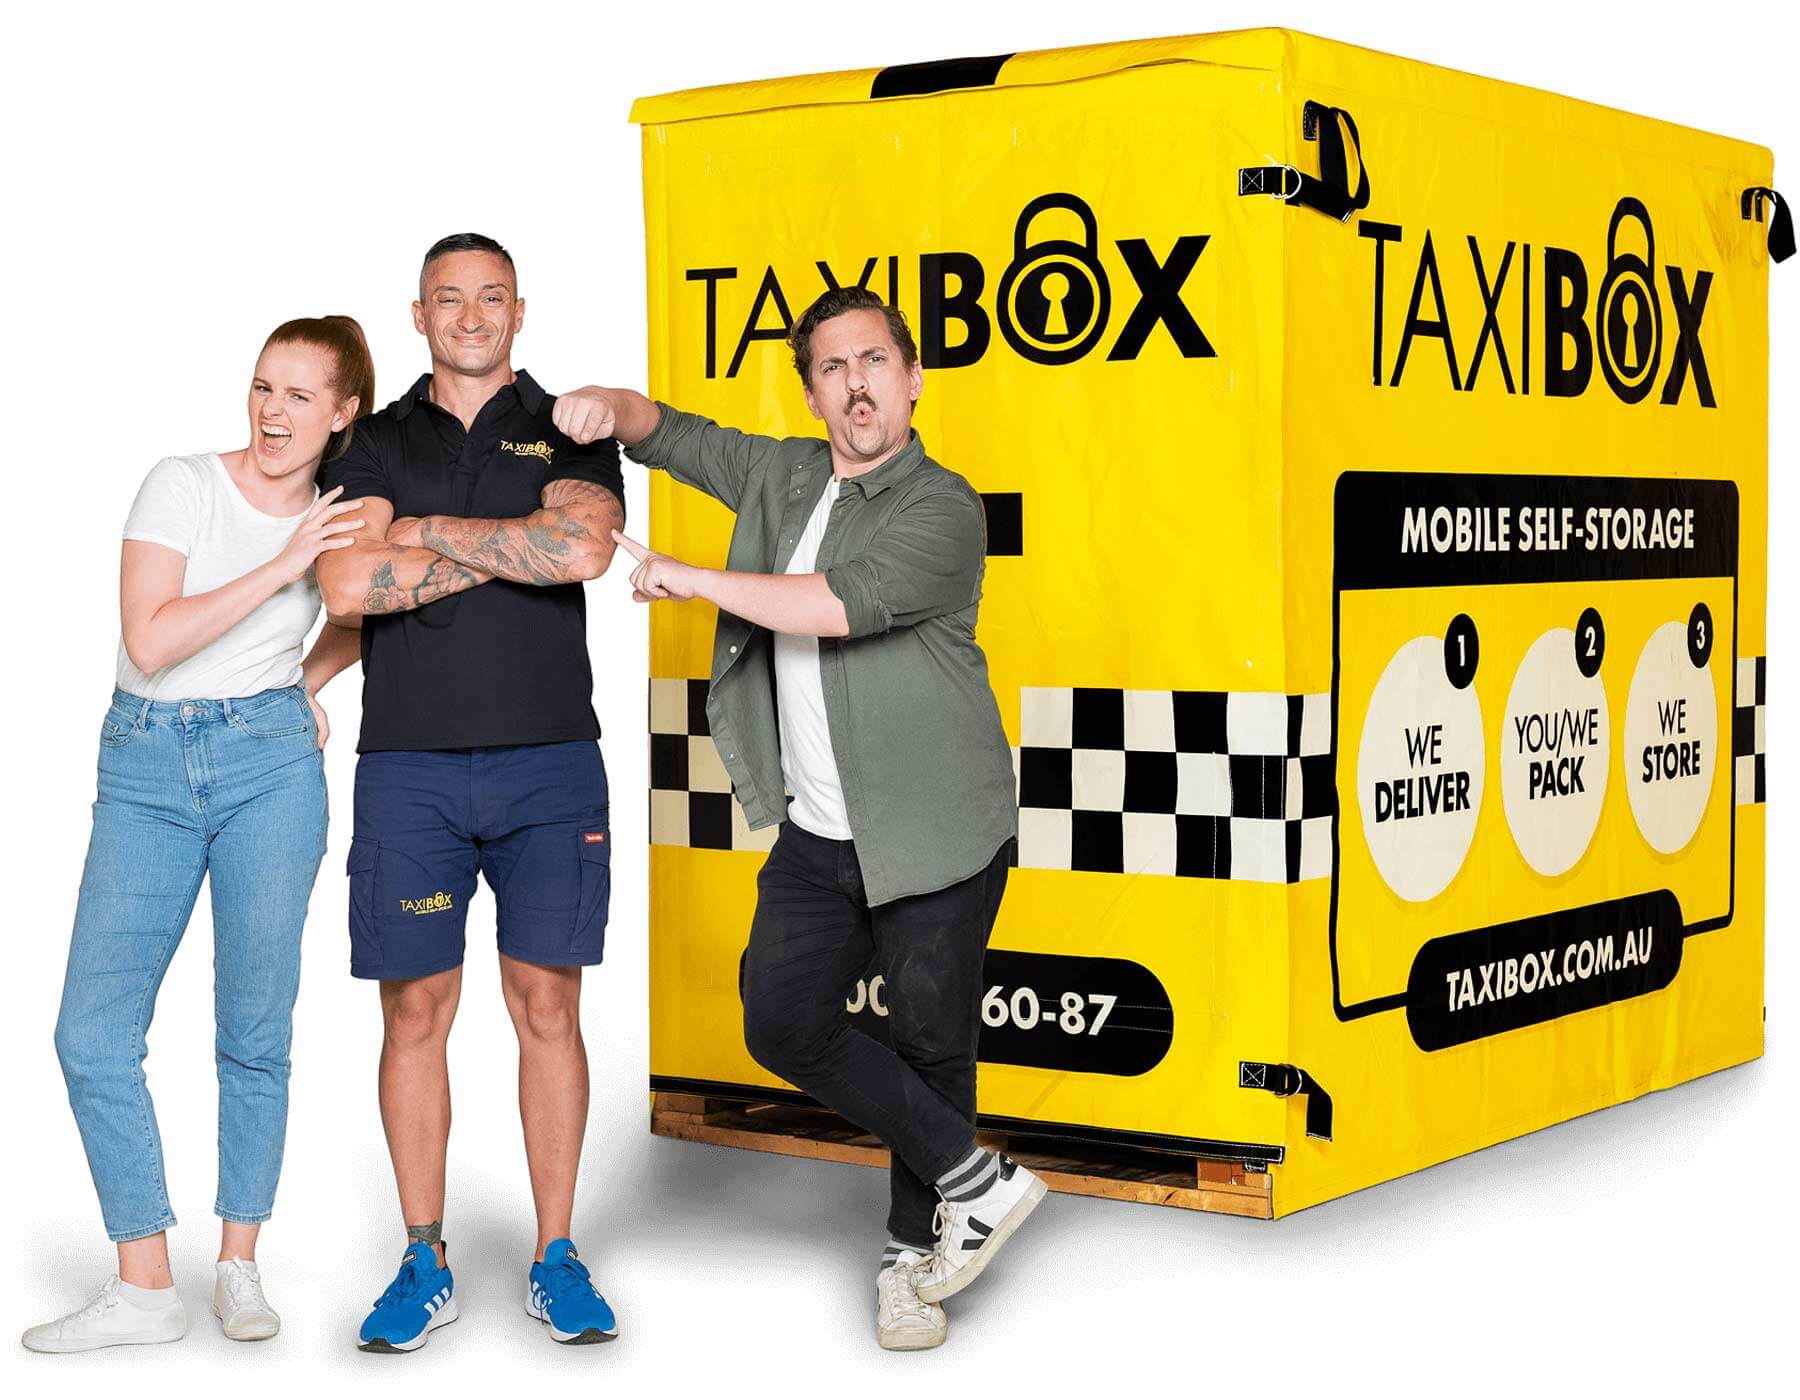 TAXIBOX - Mobile storage, On-site Storage and Cool Storage